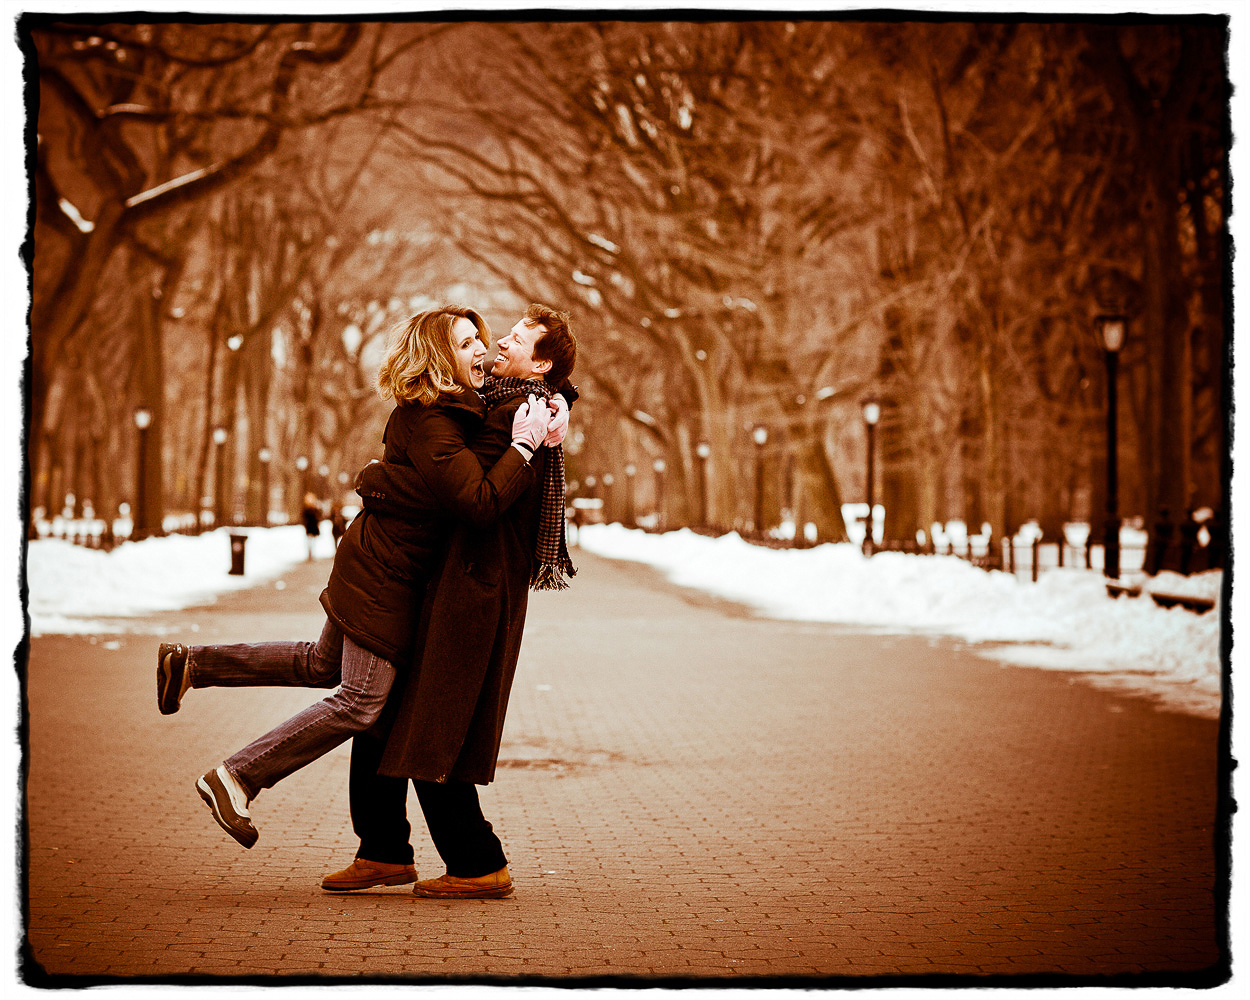 Engagement Portrait:  Liz and Doug had the fresh snow in Central Park all to themselves during this wintry shoot.